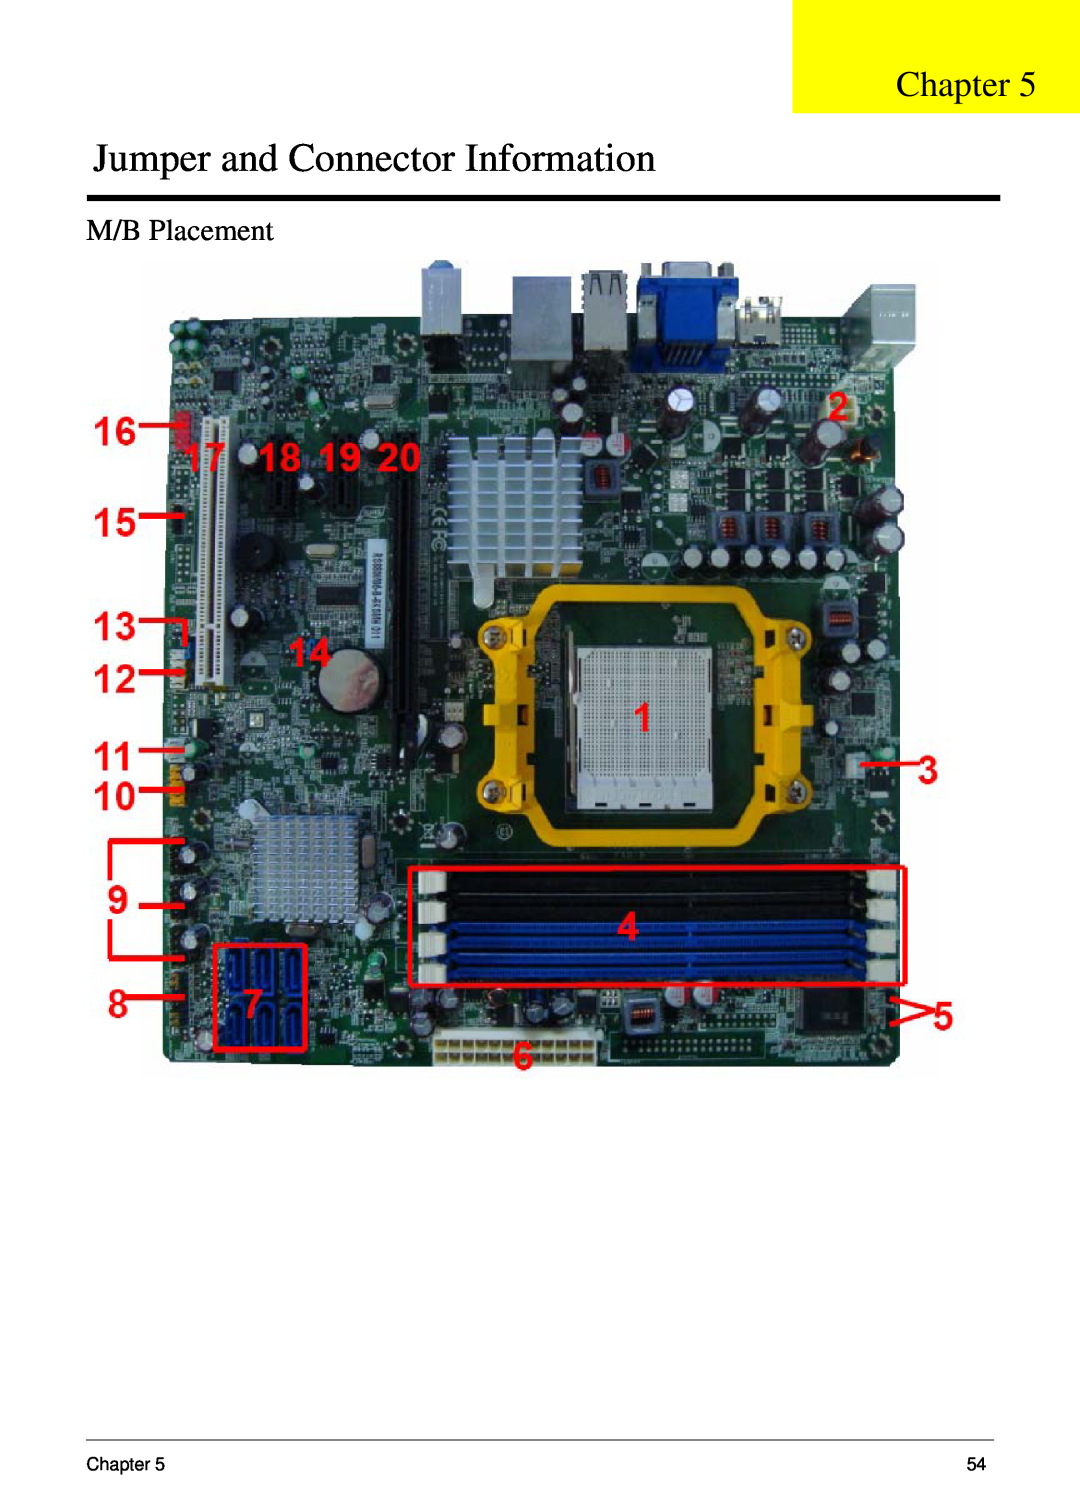 Acer m3400(g) manual Jumper and Connector Information, M/B Placement, Chapter 